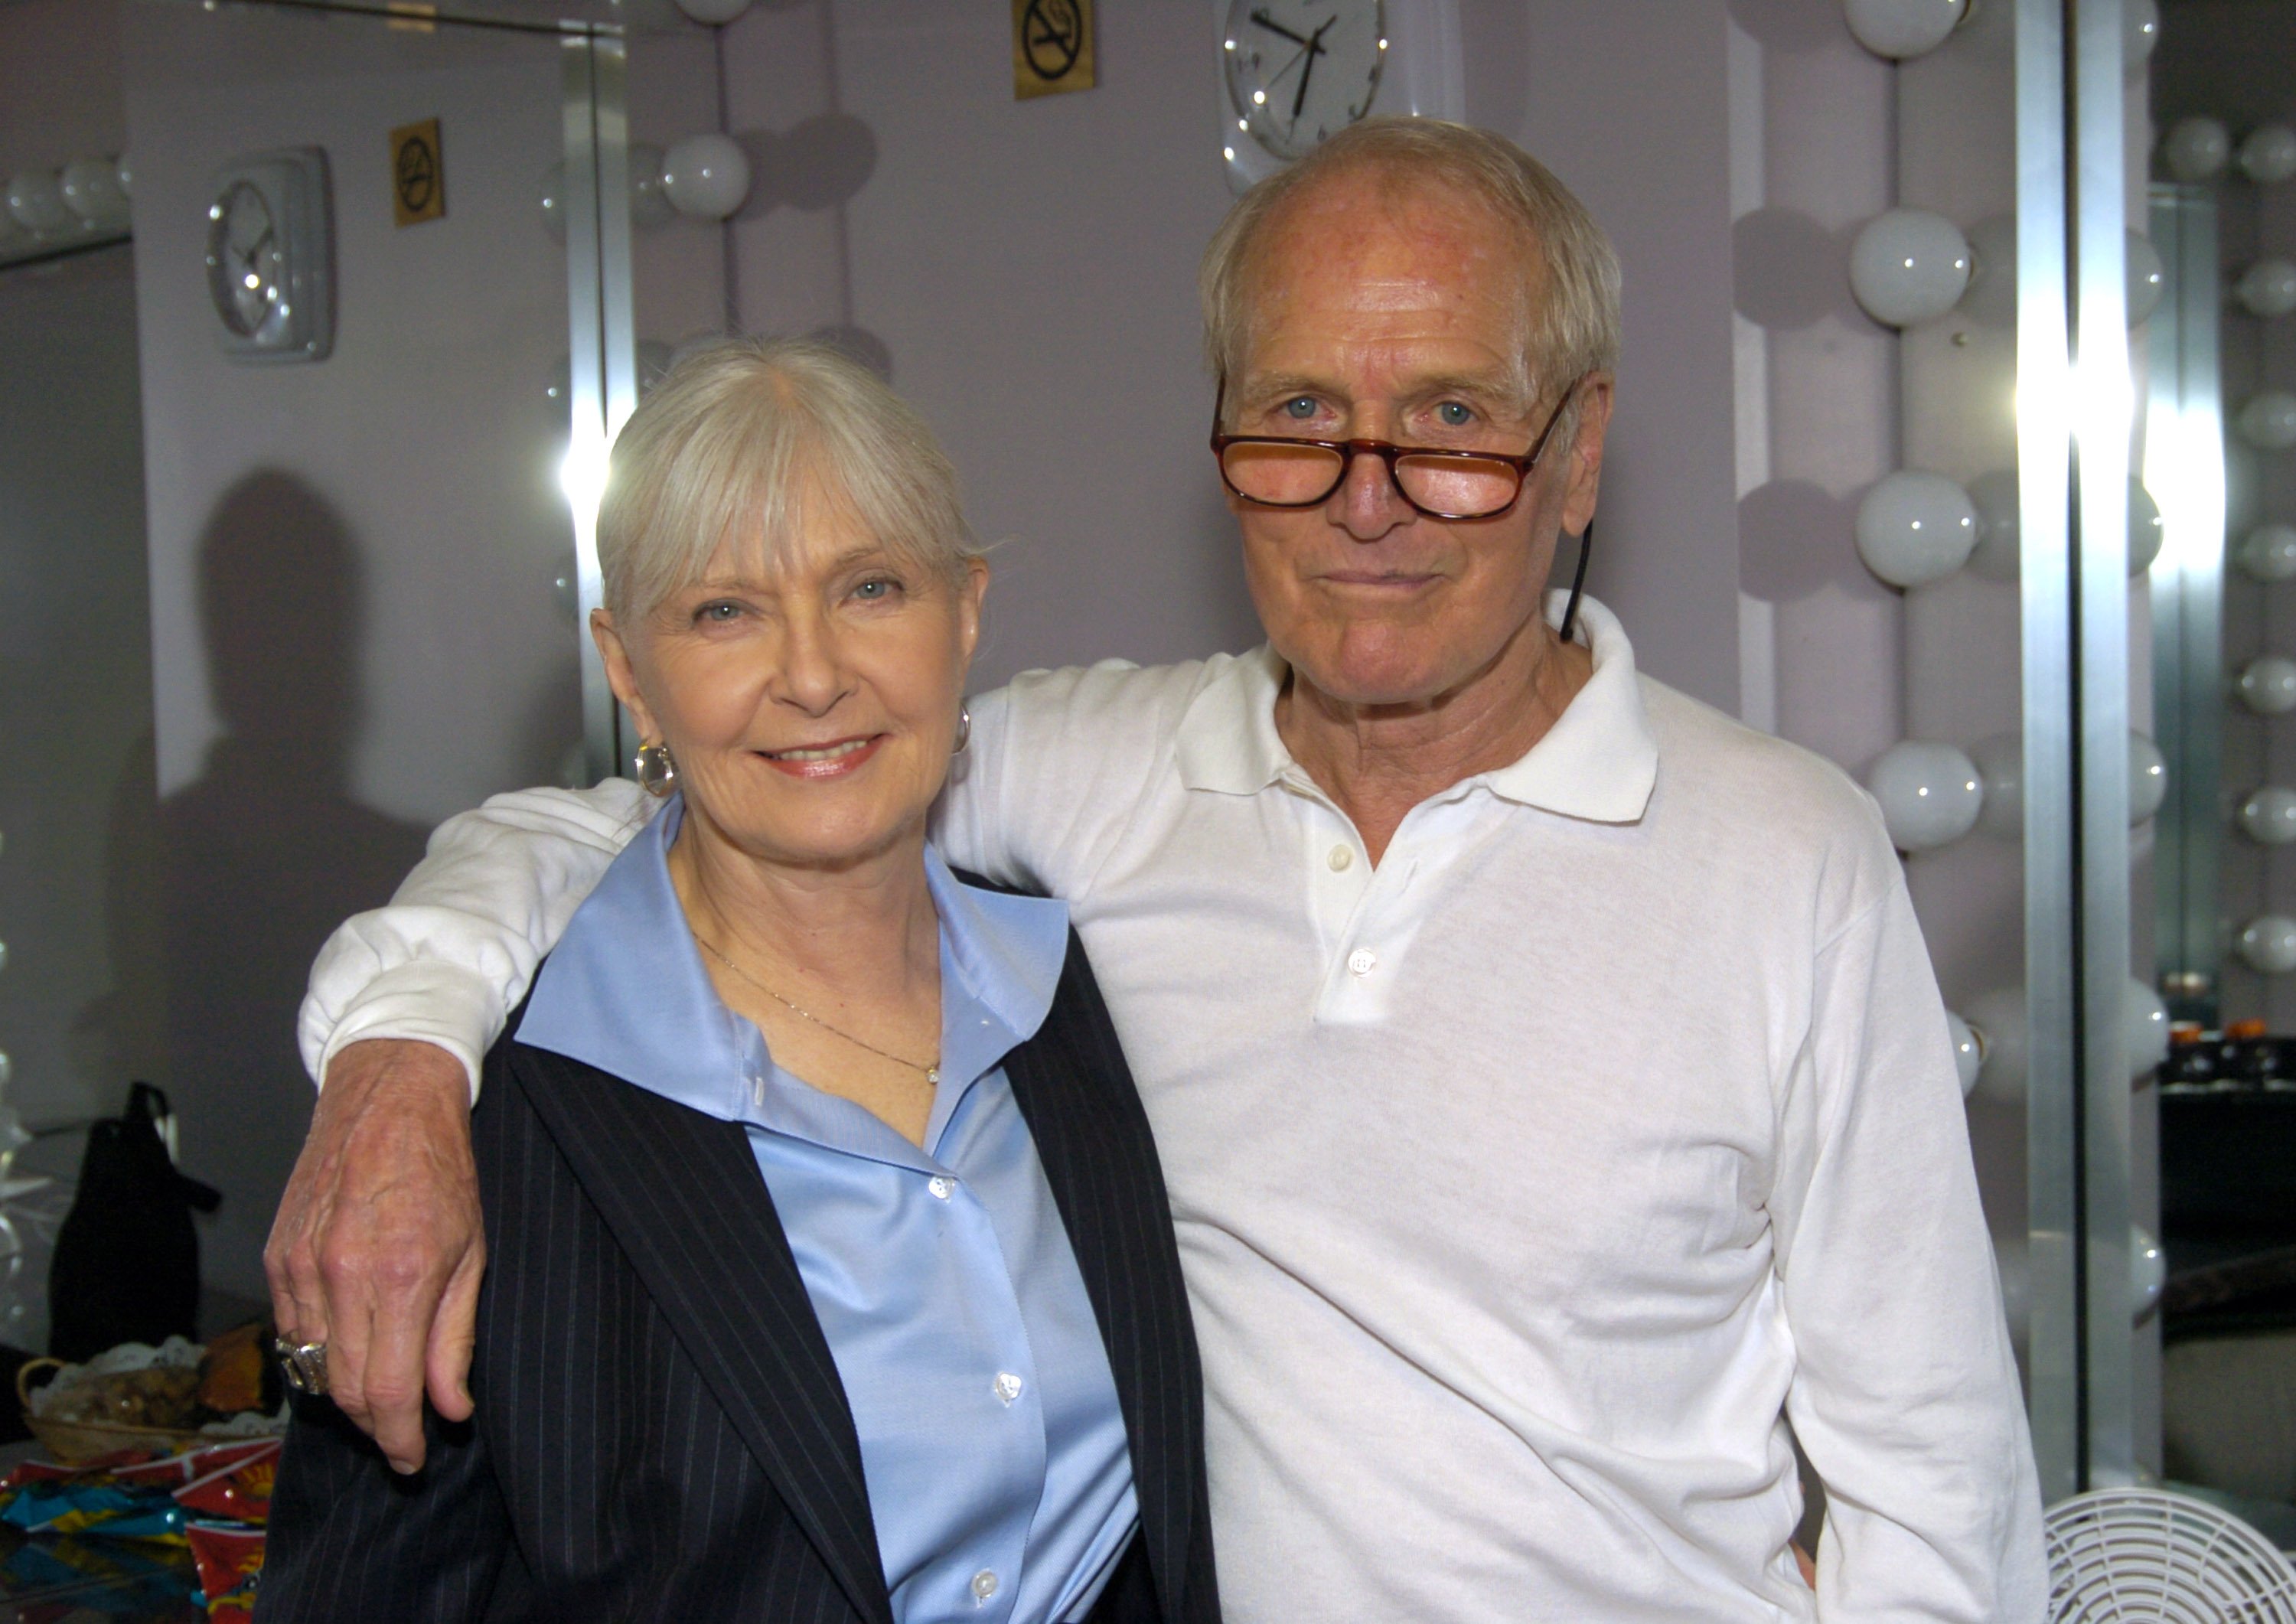 Joanne Woodward and Paul Newman on July 8, 2004 in New York City | Source: Getty Images